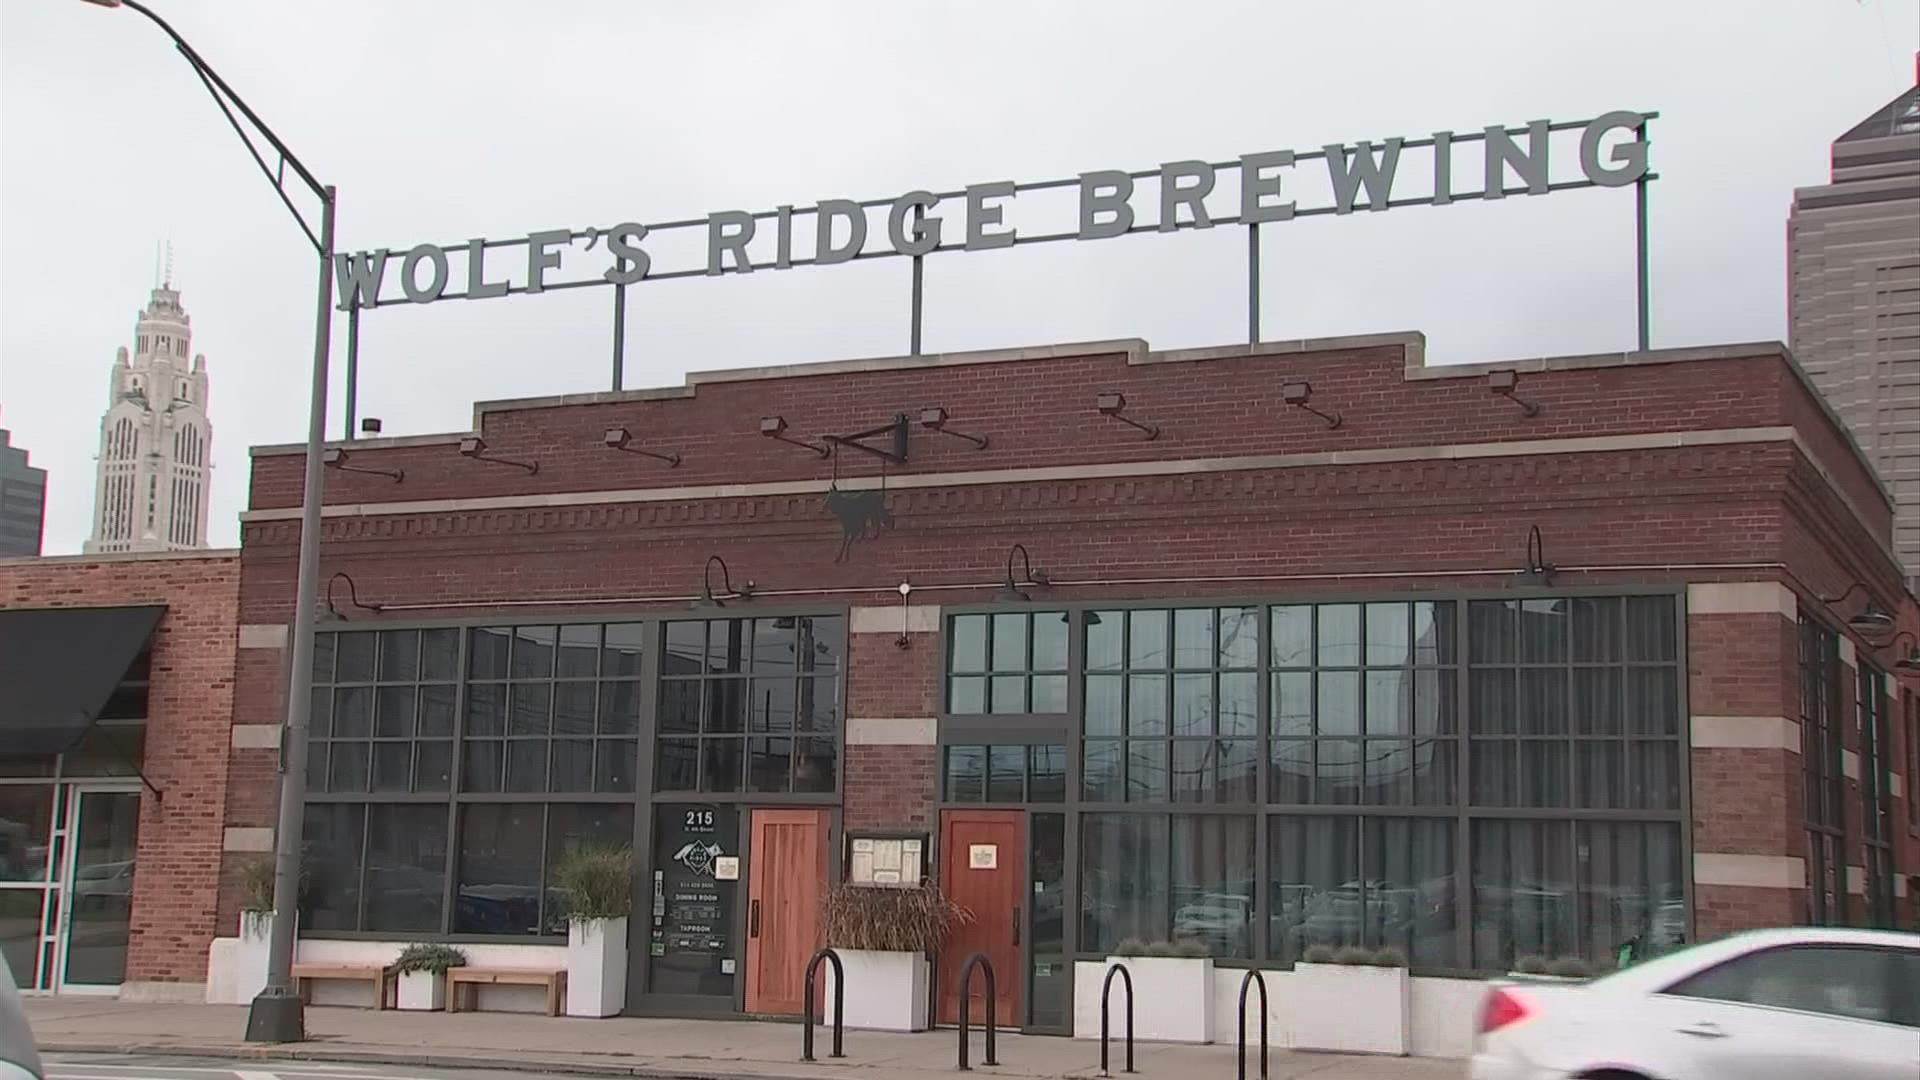 Wolf's Ridge Brewery in Columbus decided this week to implement a vaccine requirement. Co-owner Bob Szuter says only 5% of his 72 person staff is not vaccinated.